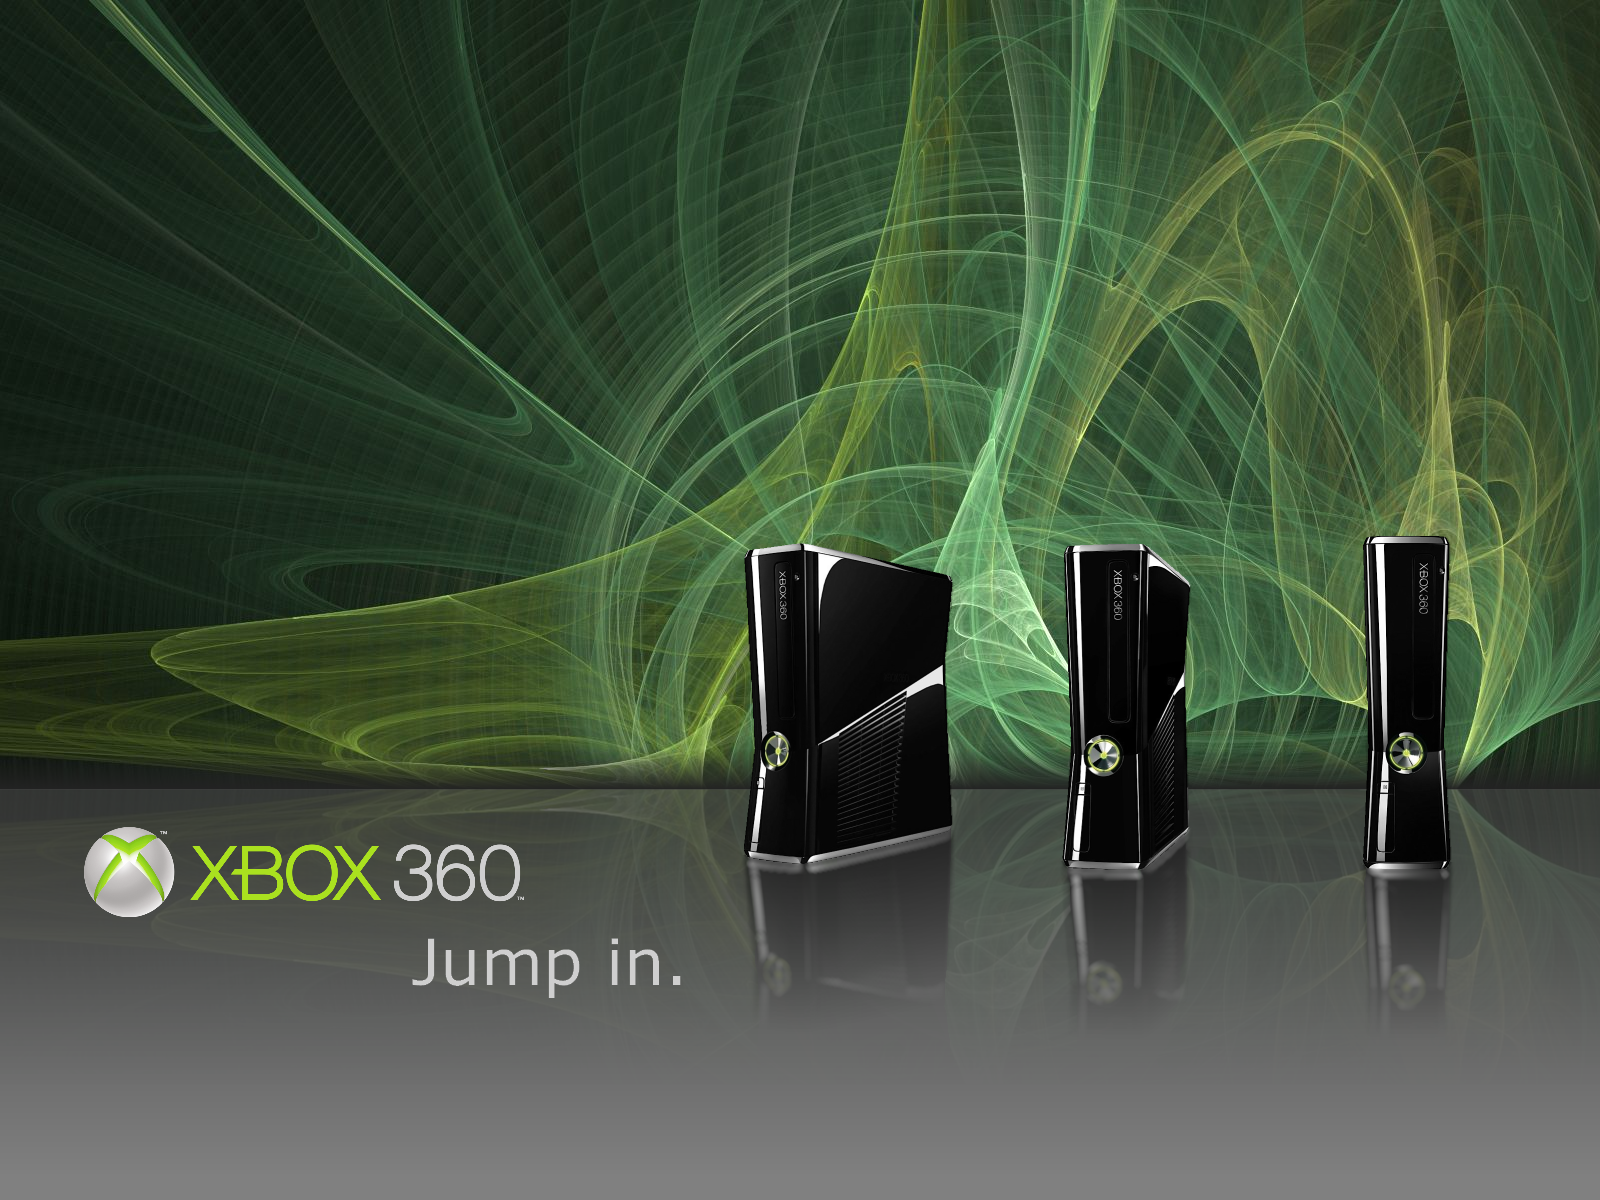 123k xbox 360 wallpaper about me xbox 360 wallpaper for